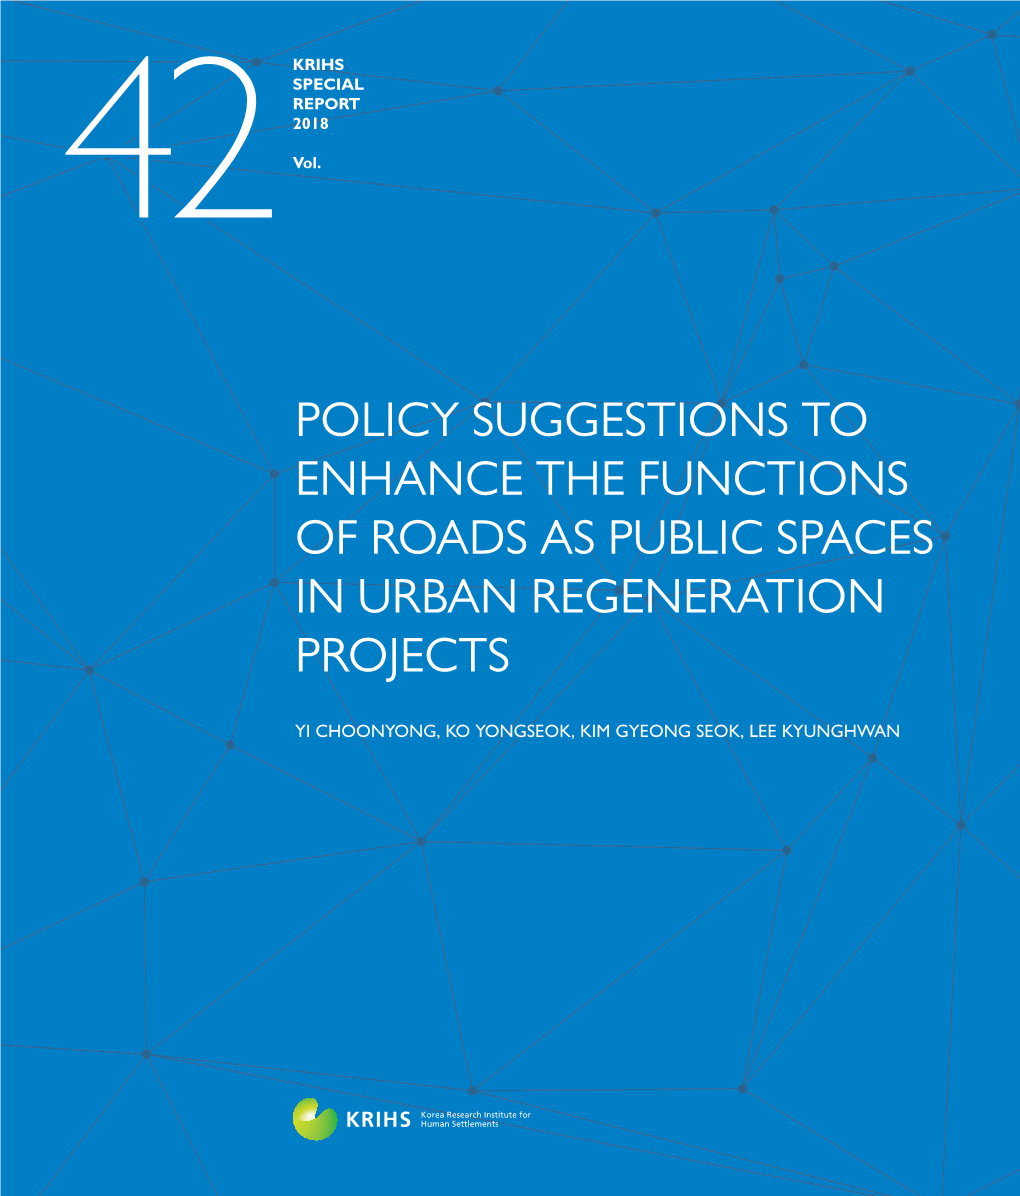 Policy Suggestions to Enhance the Functions of Roads As Public Spaces in Urban Regeneration Projects